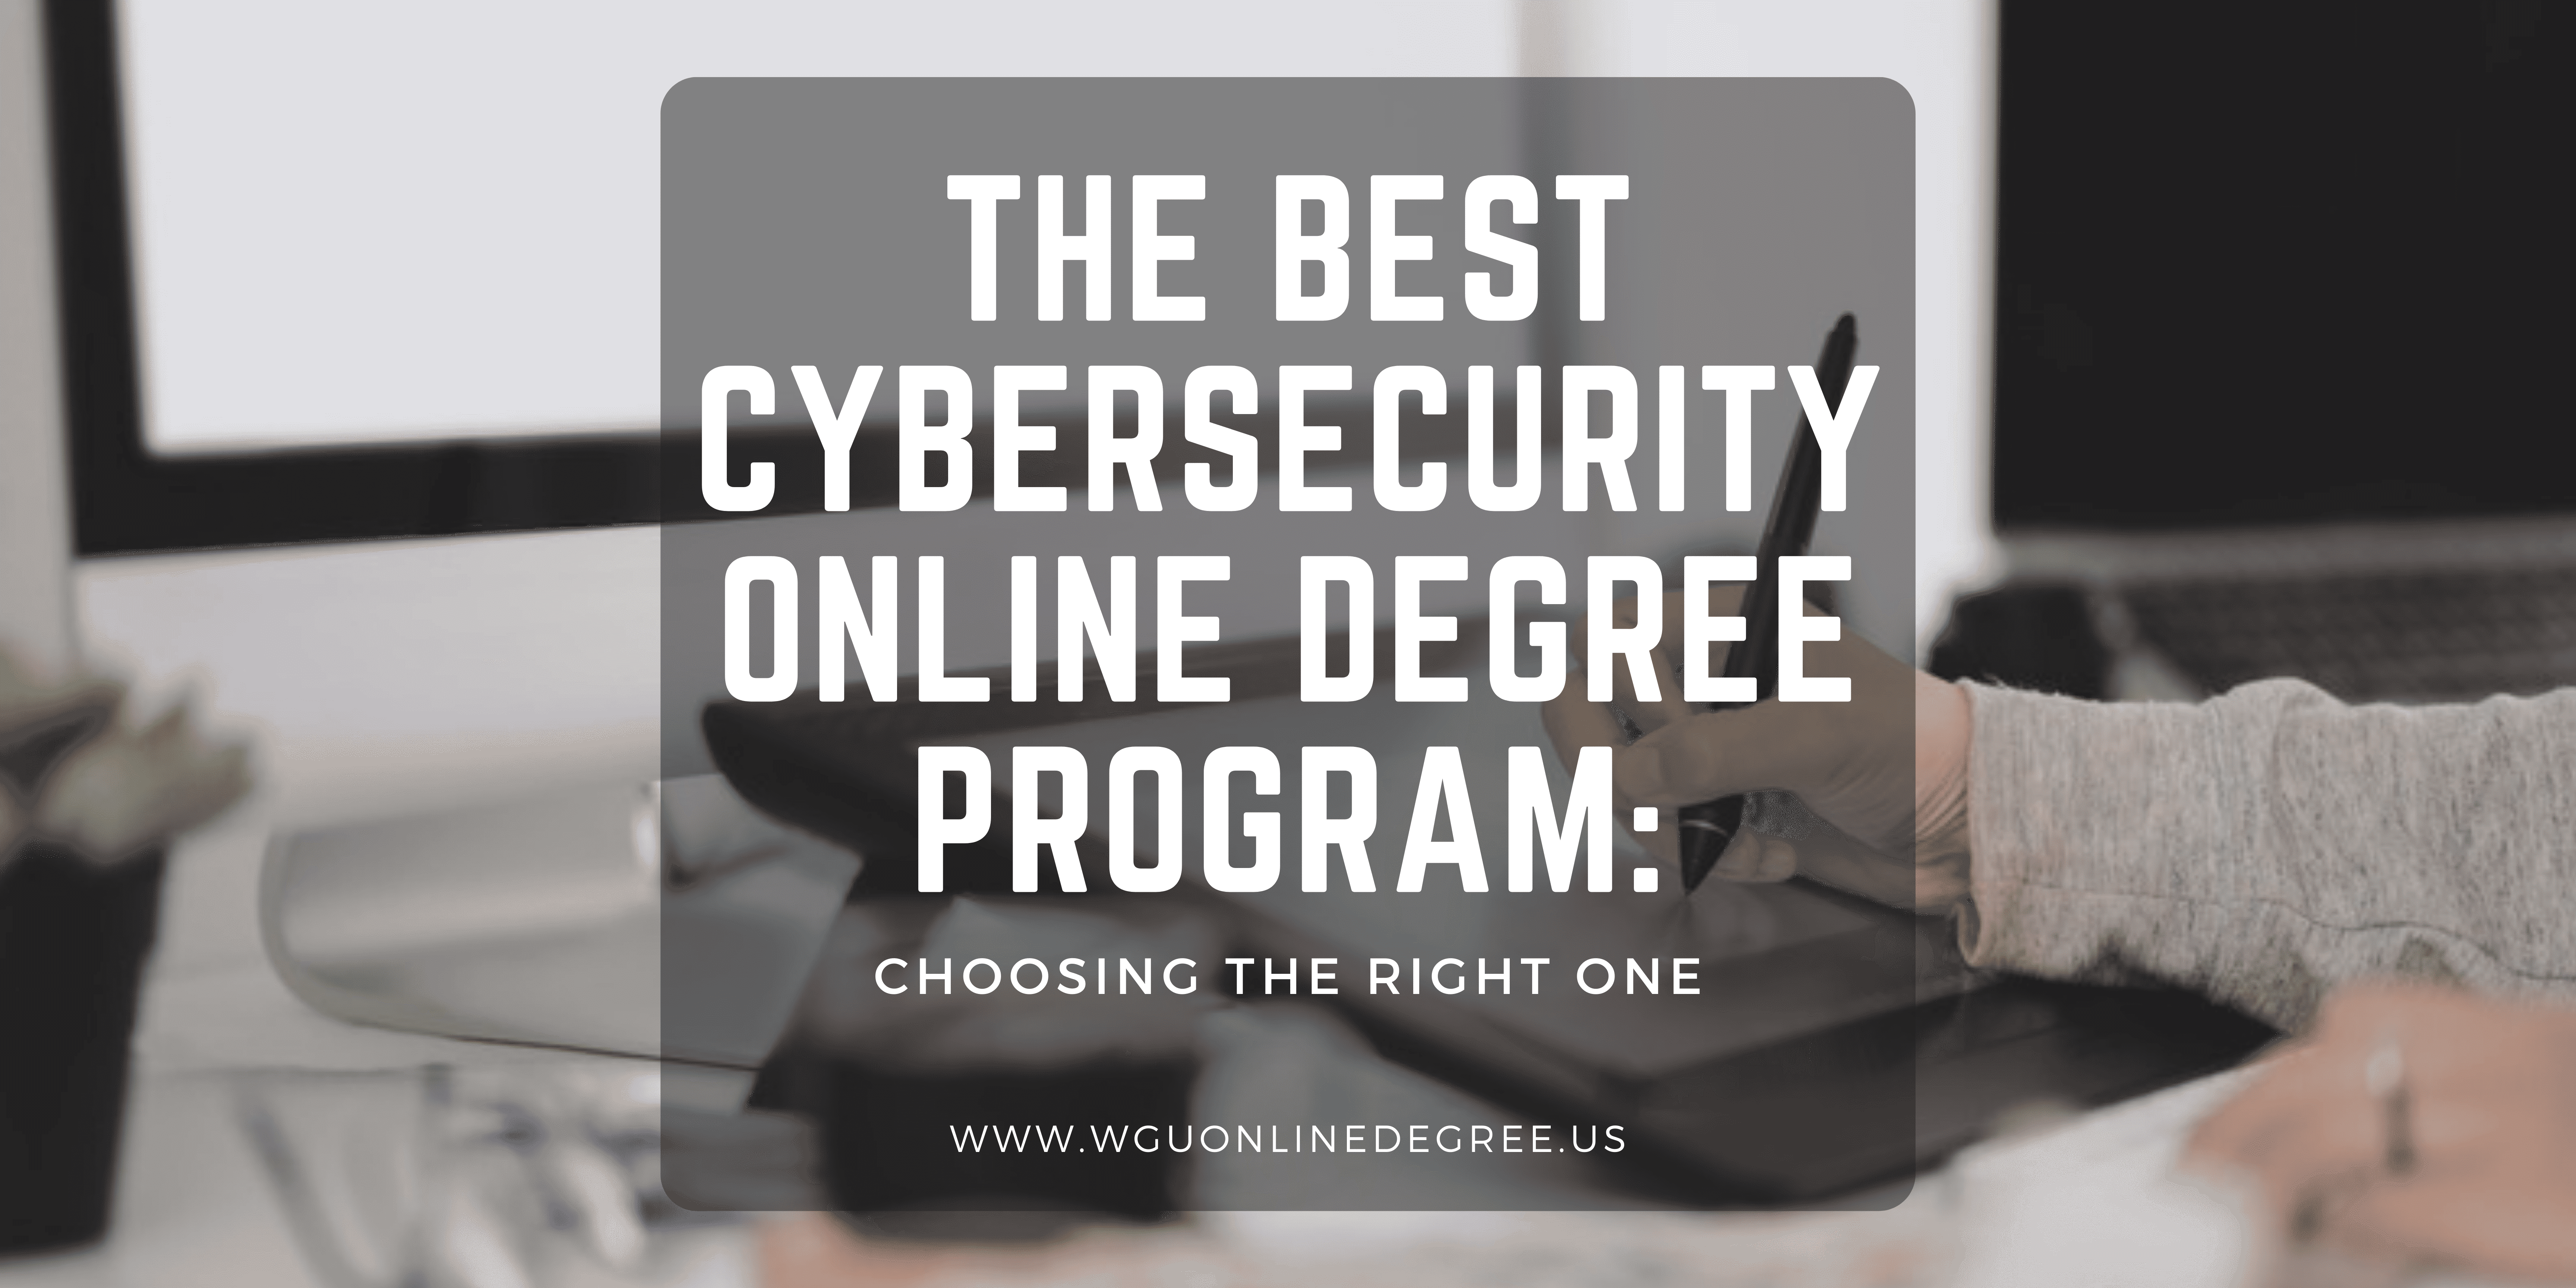 The Best Cybersecurity Online Degree Program: Choosing the Right One